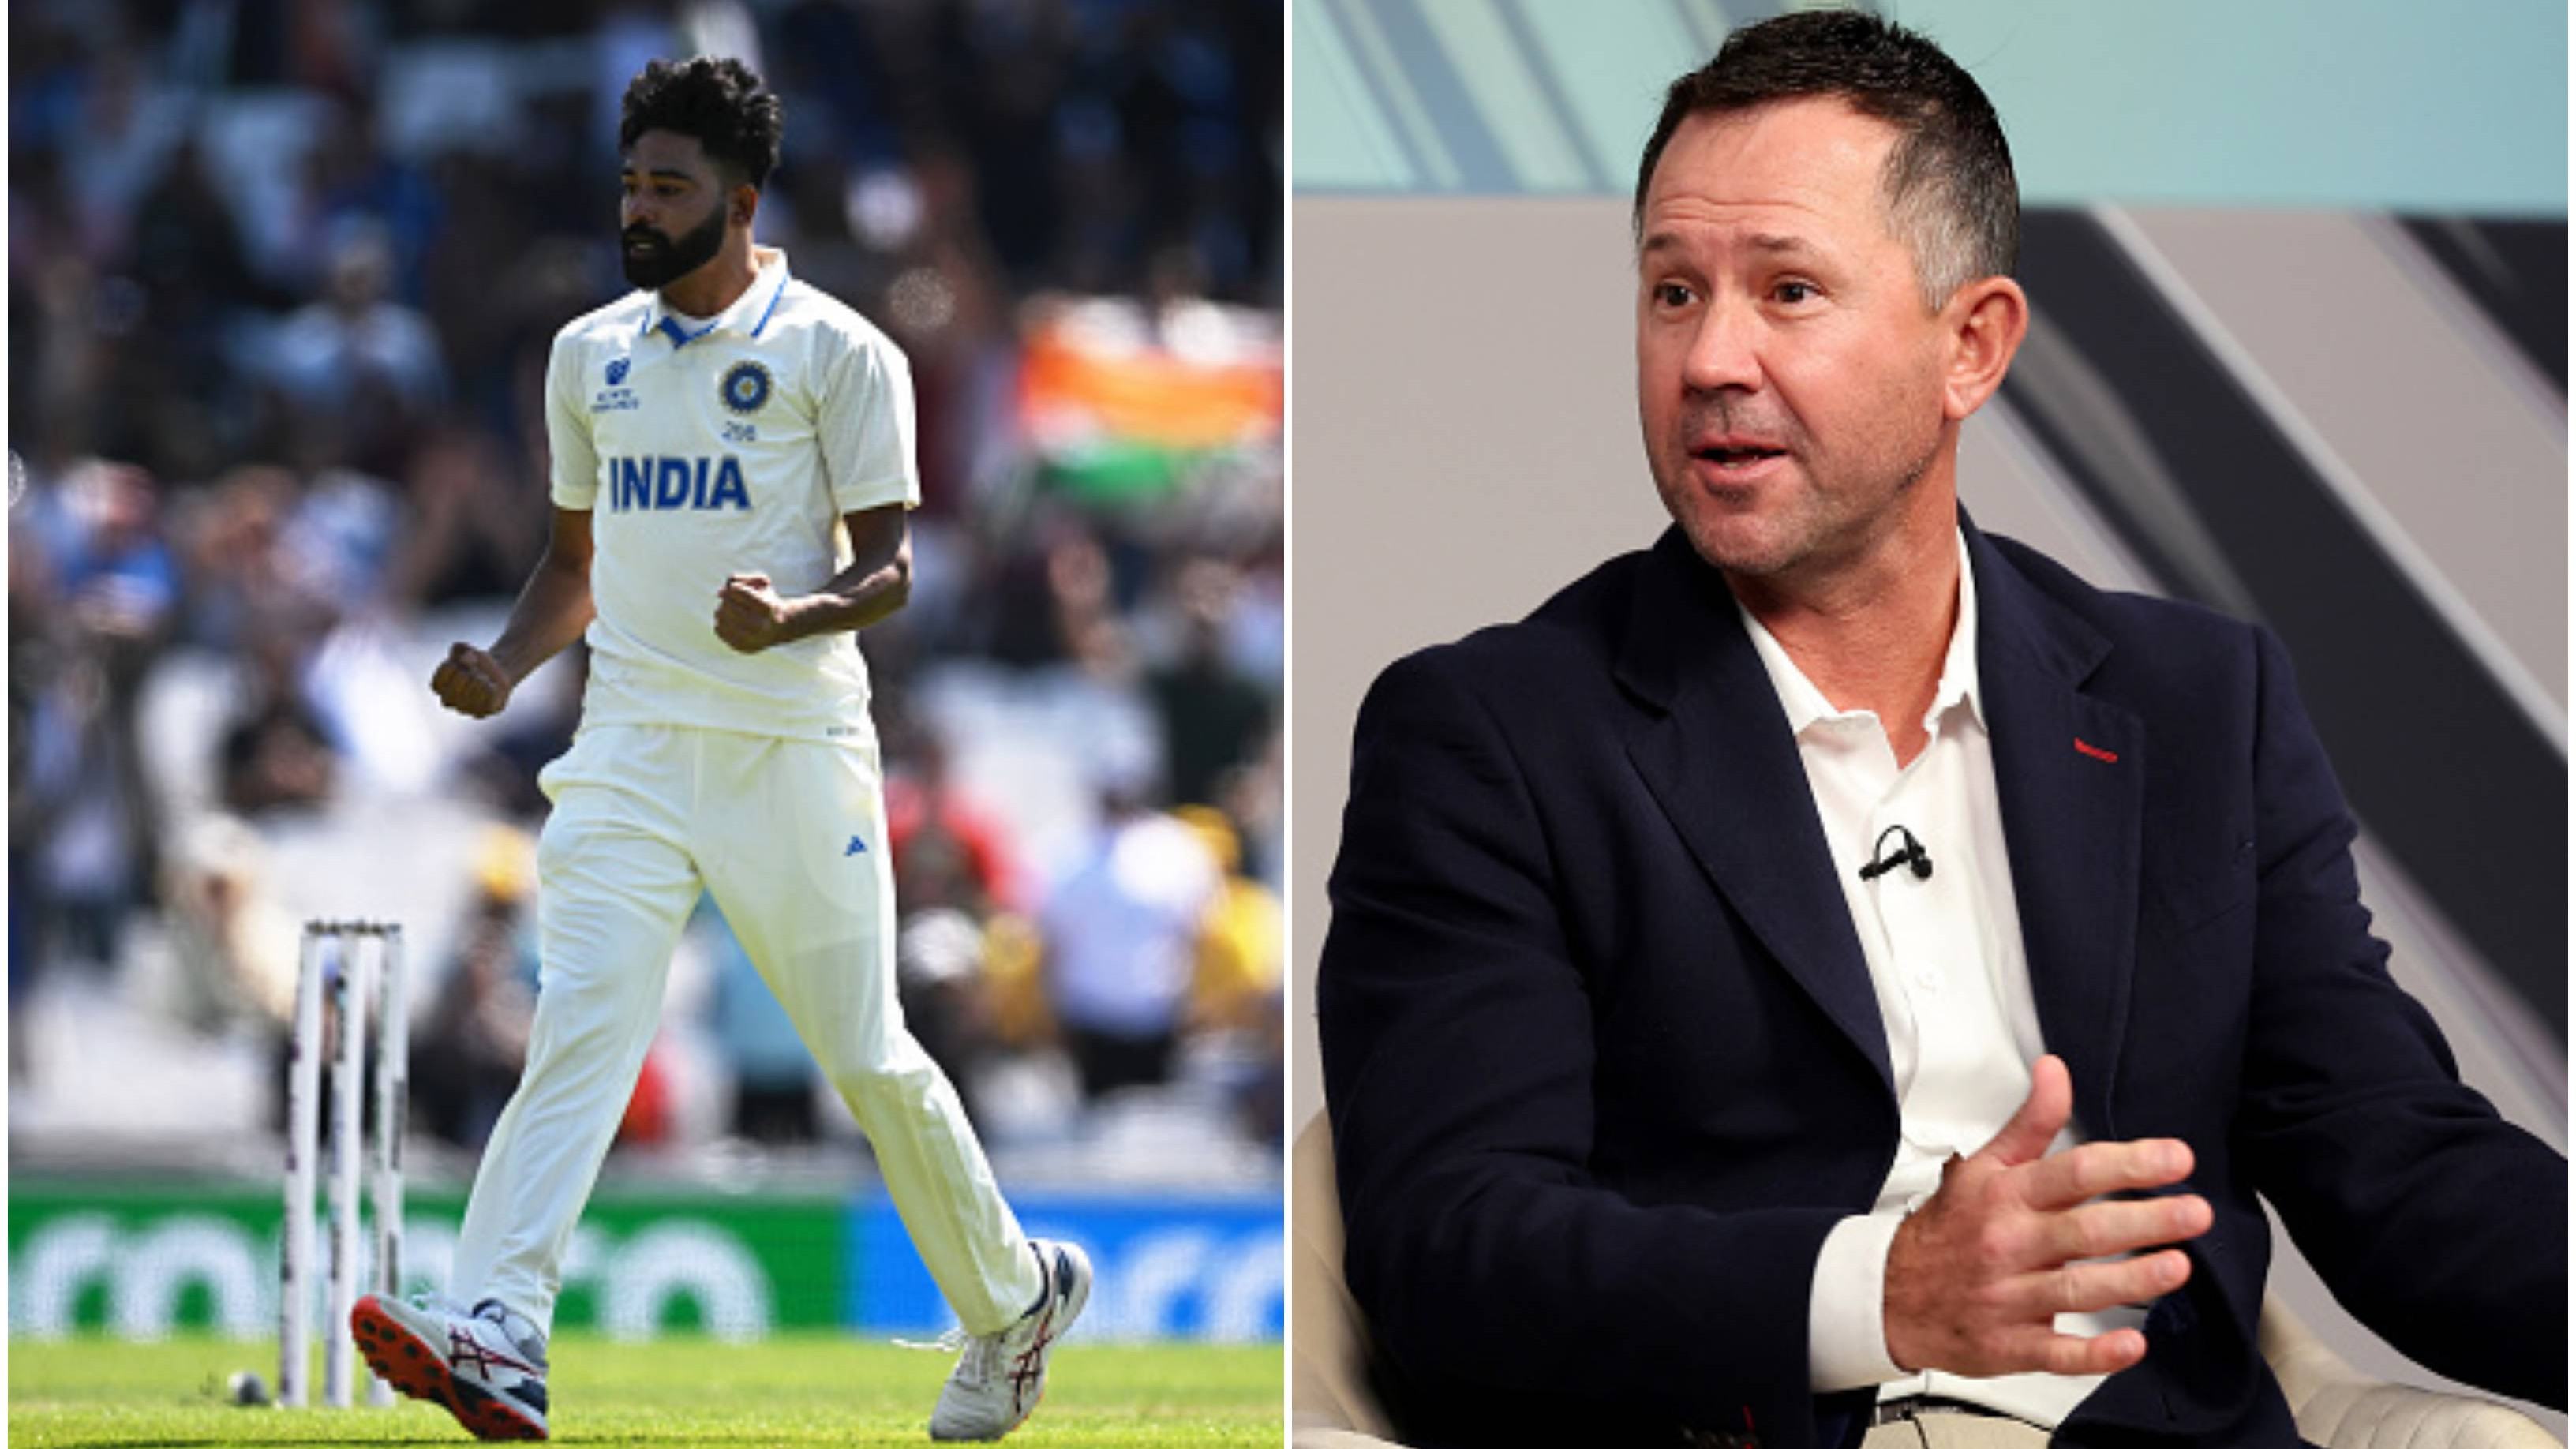 “He looks like the ultimate competitor,” Ponting lauds Siraj for his 4-wicket haul in first innings of WTC final